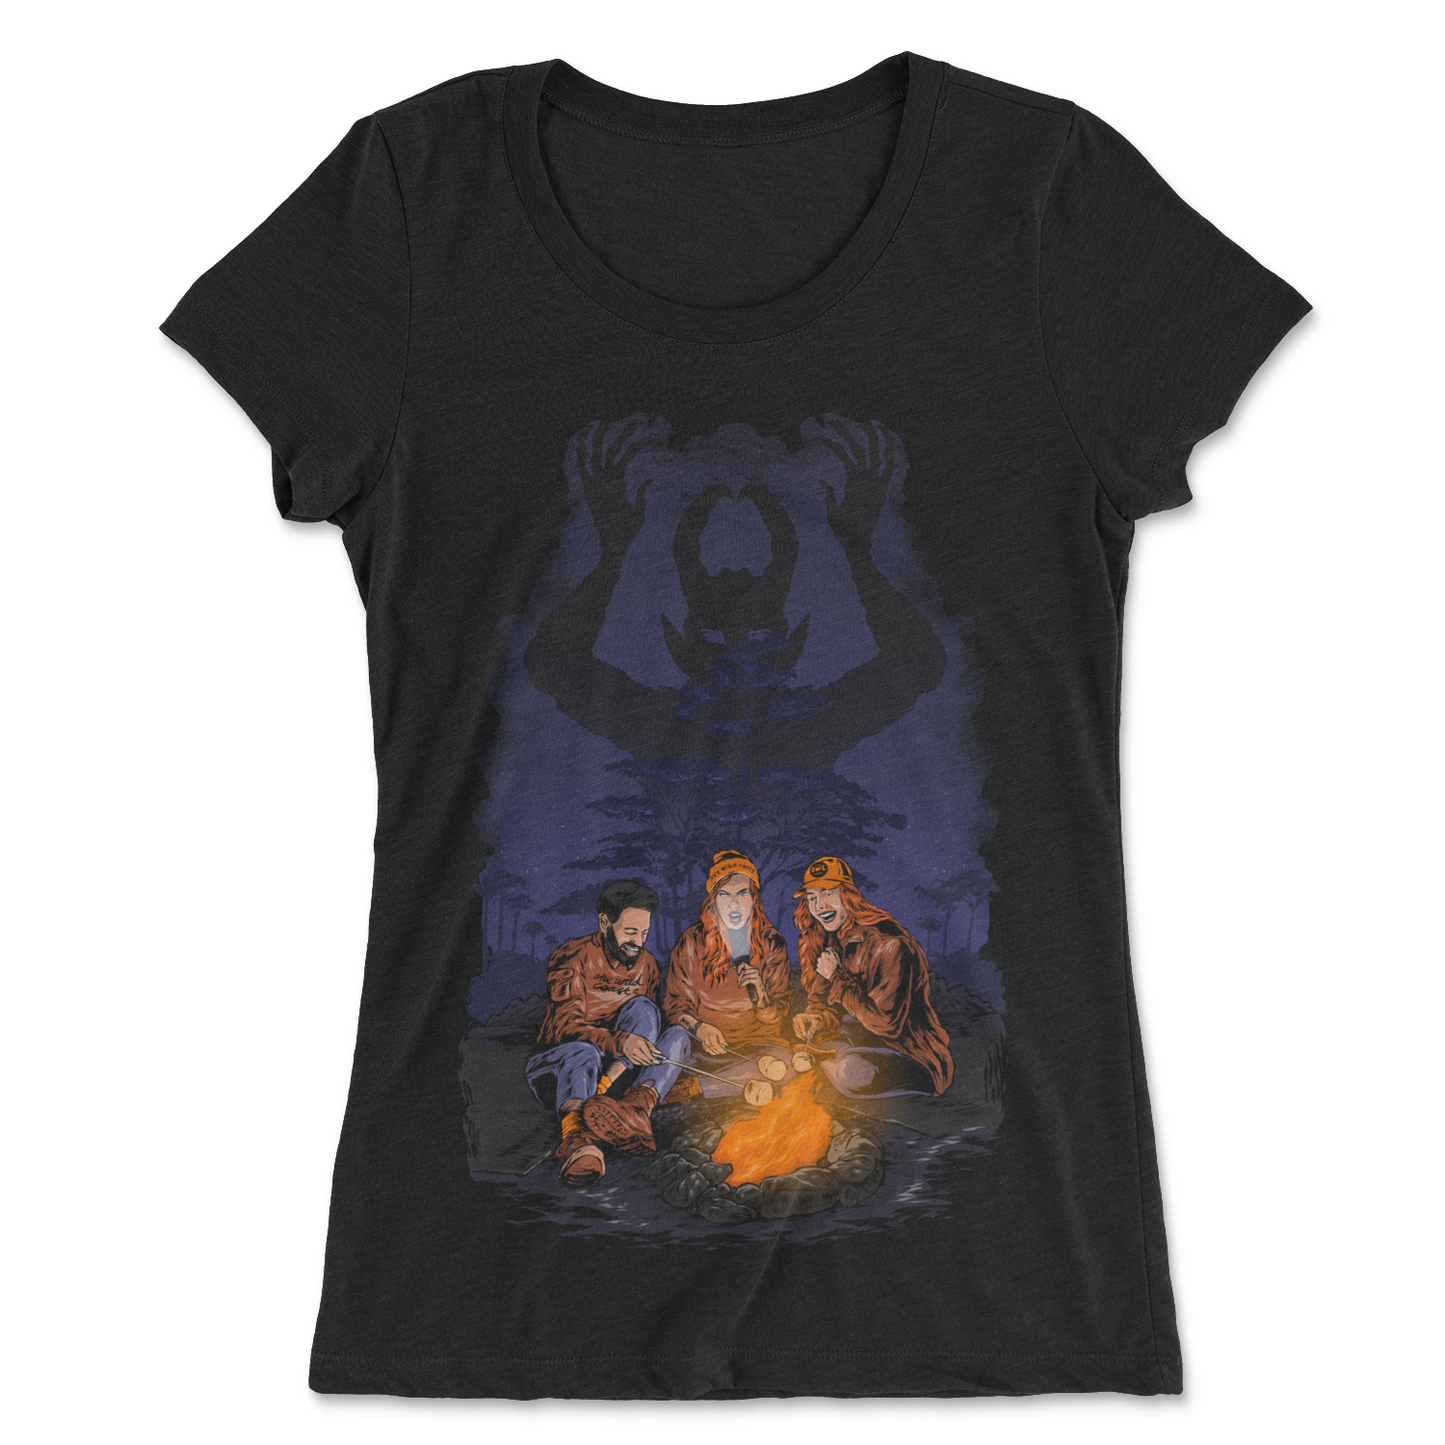 In the Shadow Women's Triblend T-shirt